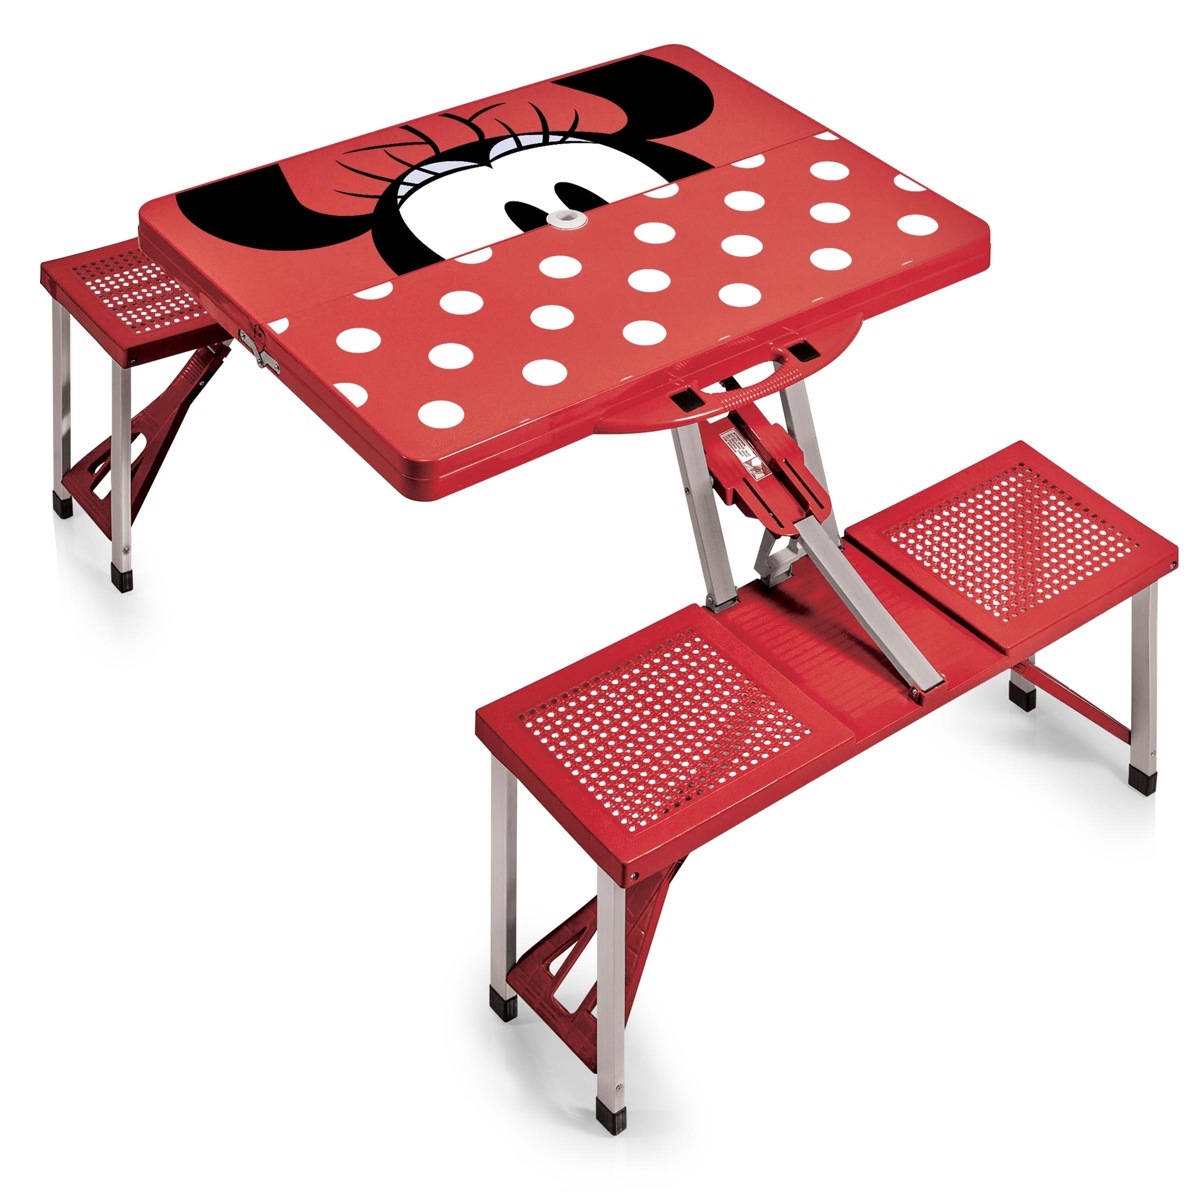 Disney's Minnie Mouse Picnic Table Portable Folding Table with Seats - Red